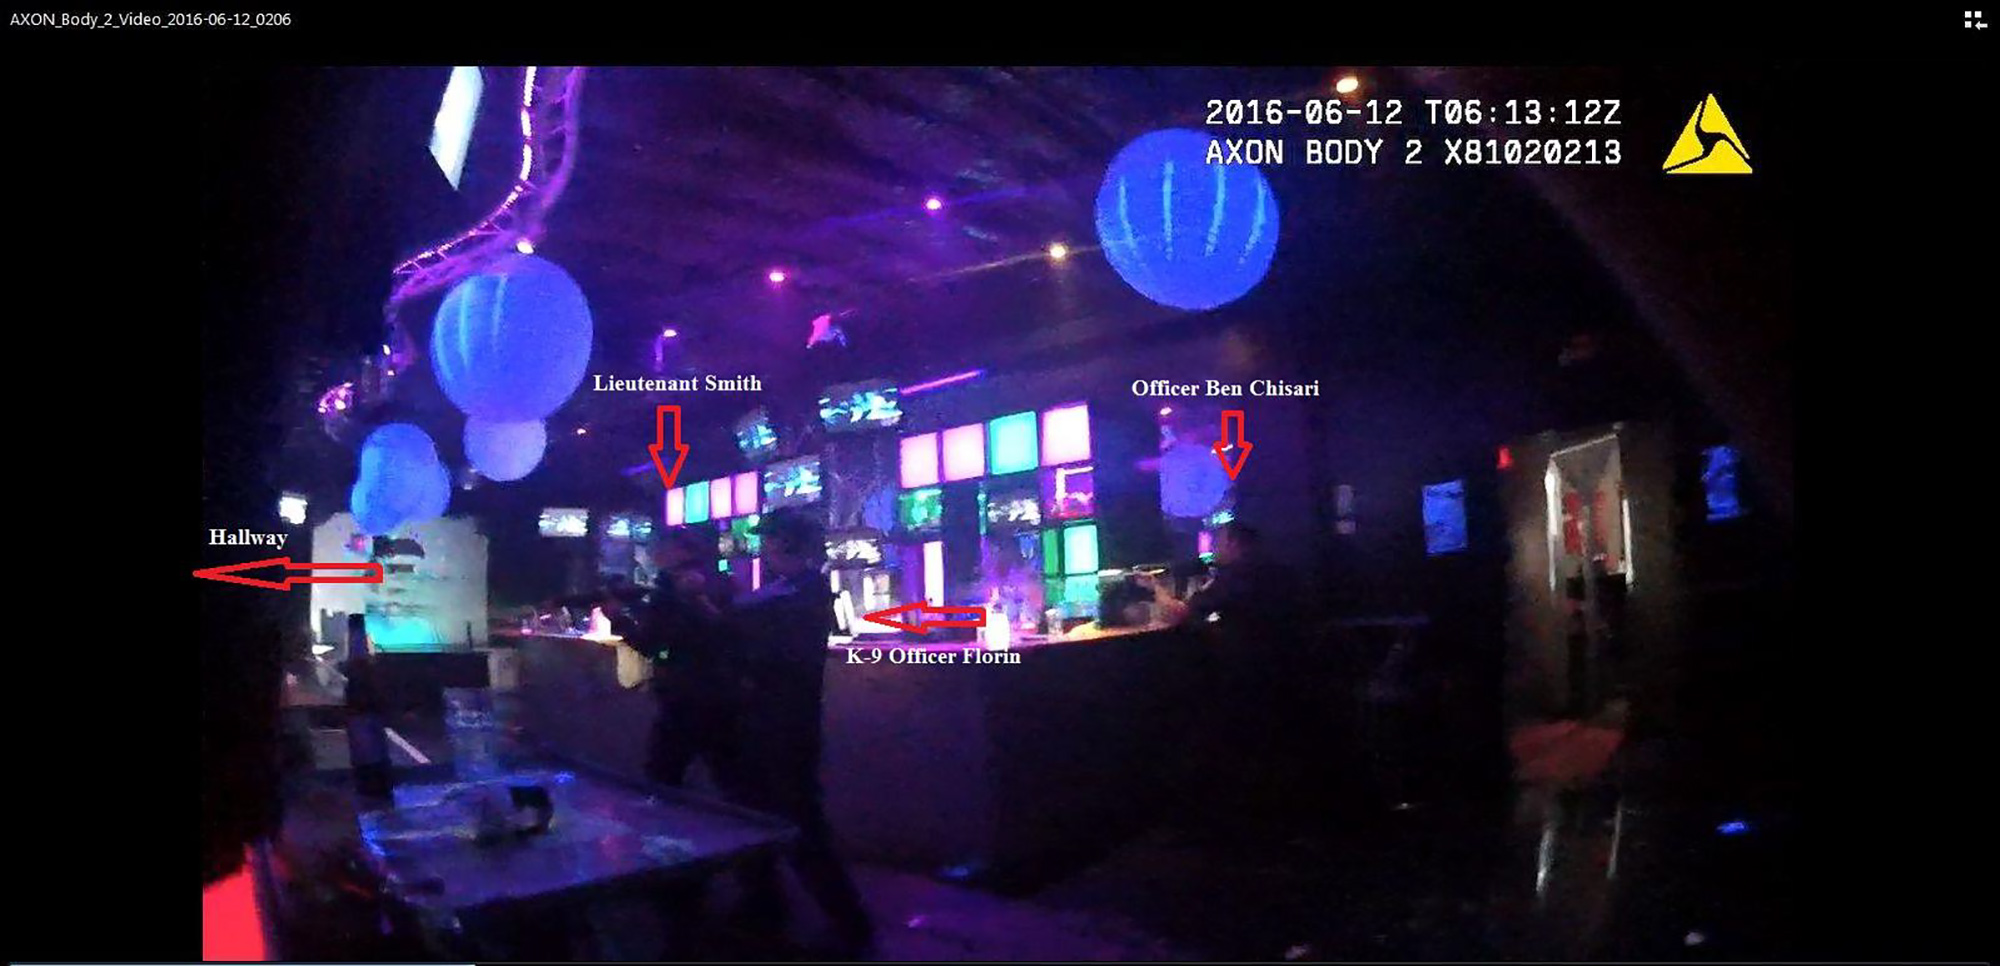 PHOTO: An image released by the Orlando Police on April 14, 2017 shows police officers inside the Pulse Nightclub during a mass shooting on June 12, 2016 in Orlando, Fla.